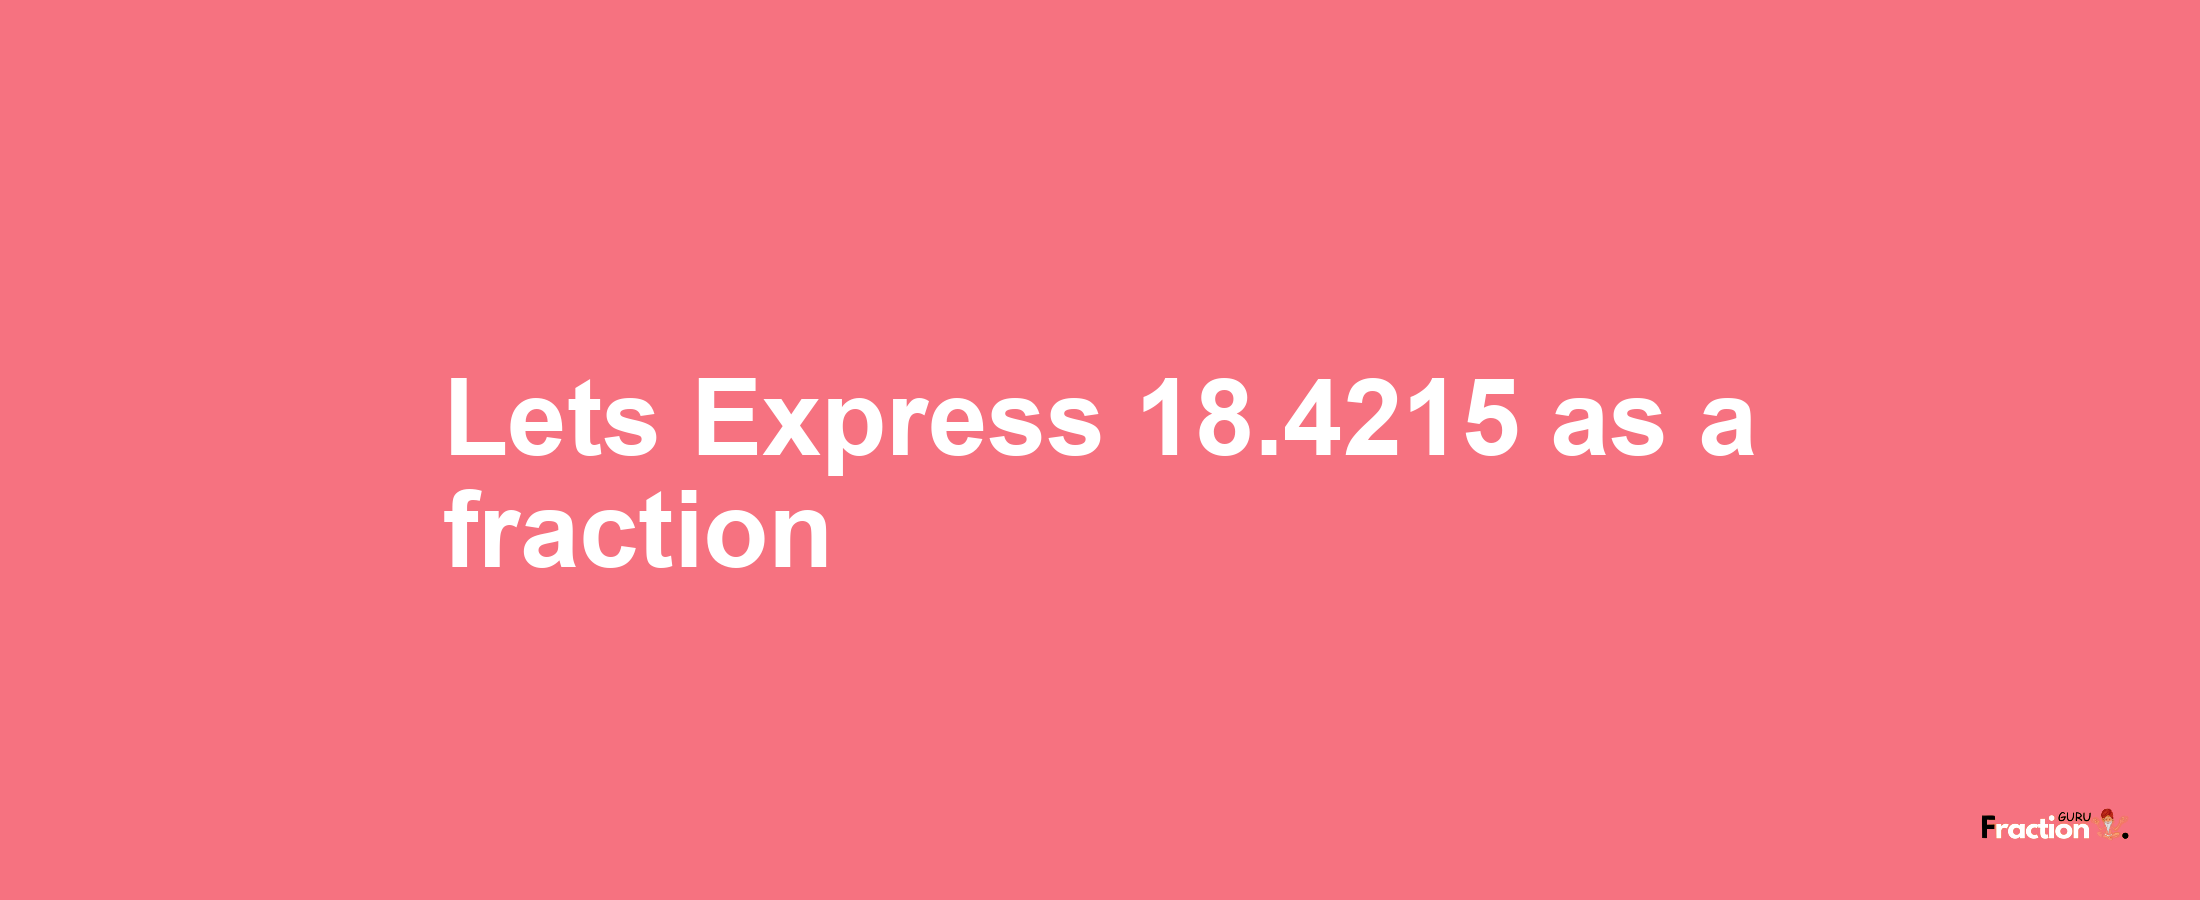 Lets Express 18.4215 as afraction